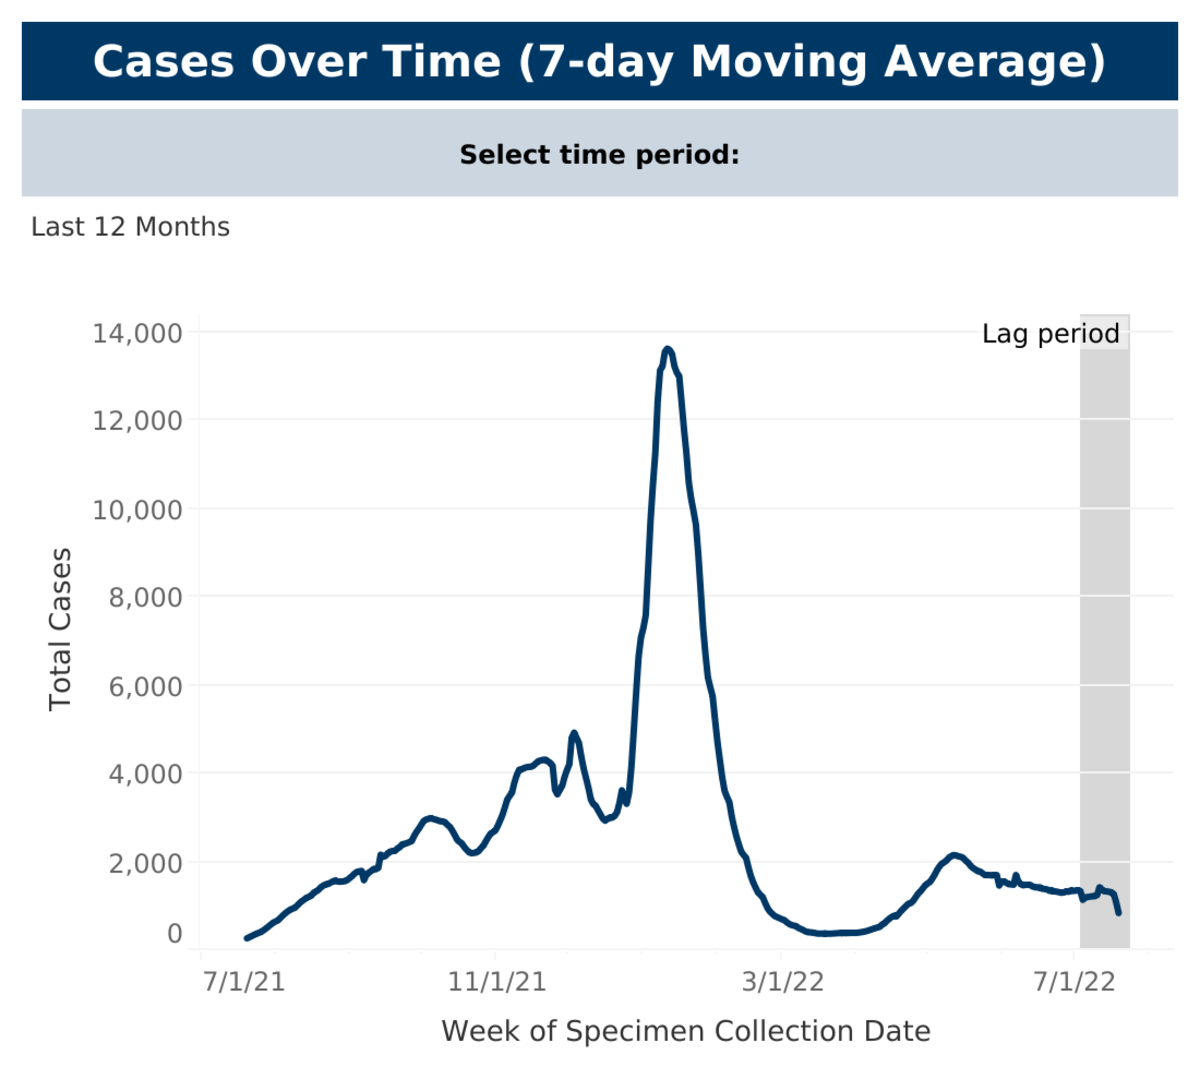 Case 7-day Moving Average Dashboard